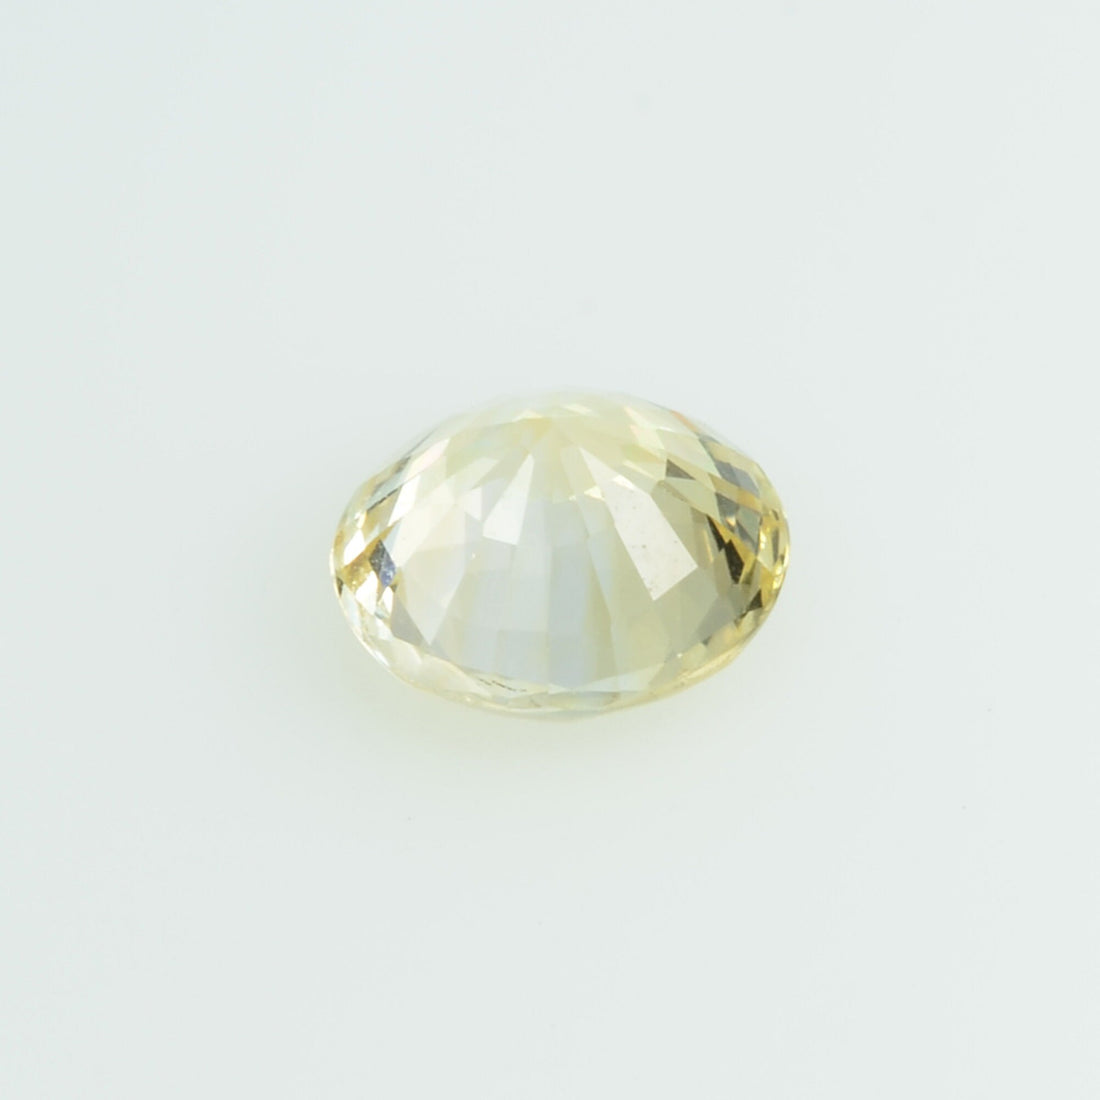 1.01 Cts Natural Yellow Sapphire Loose Gemstone Round Cut